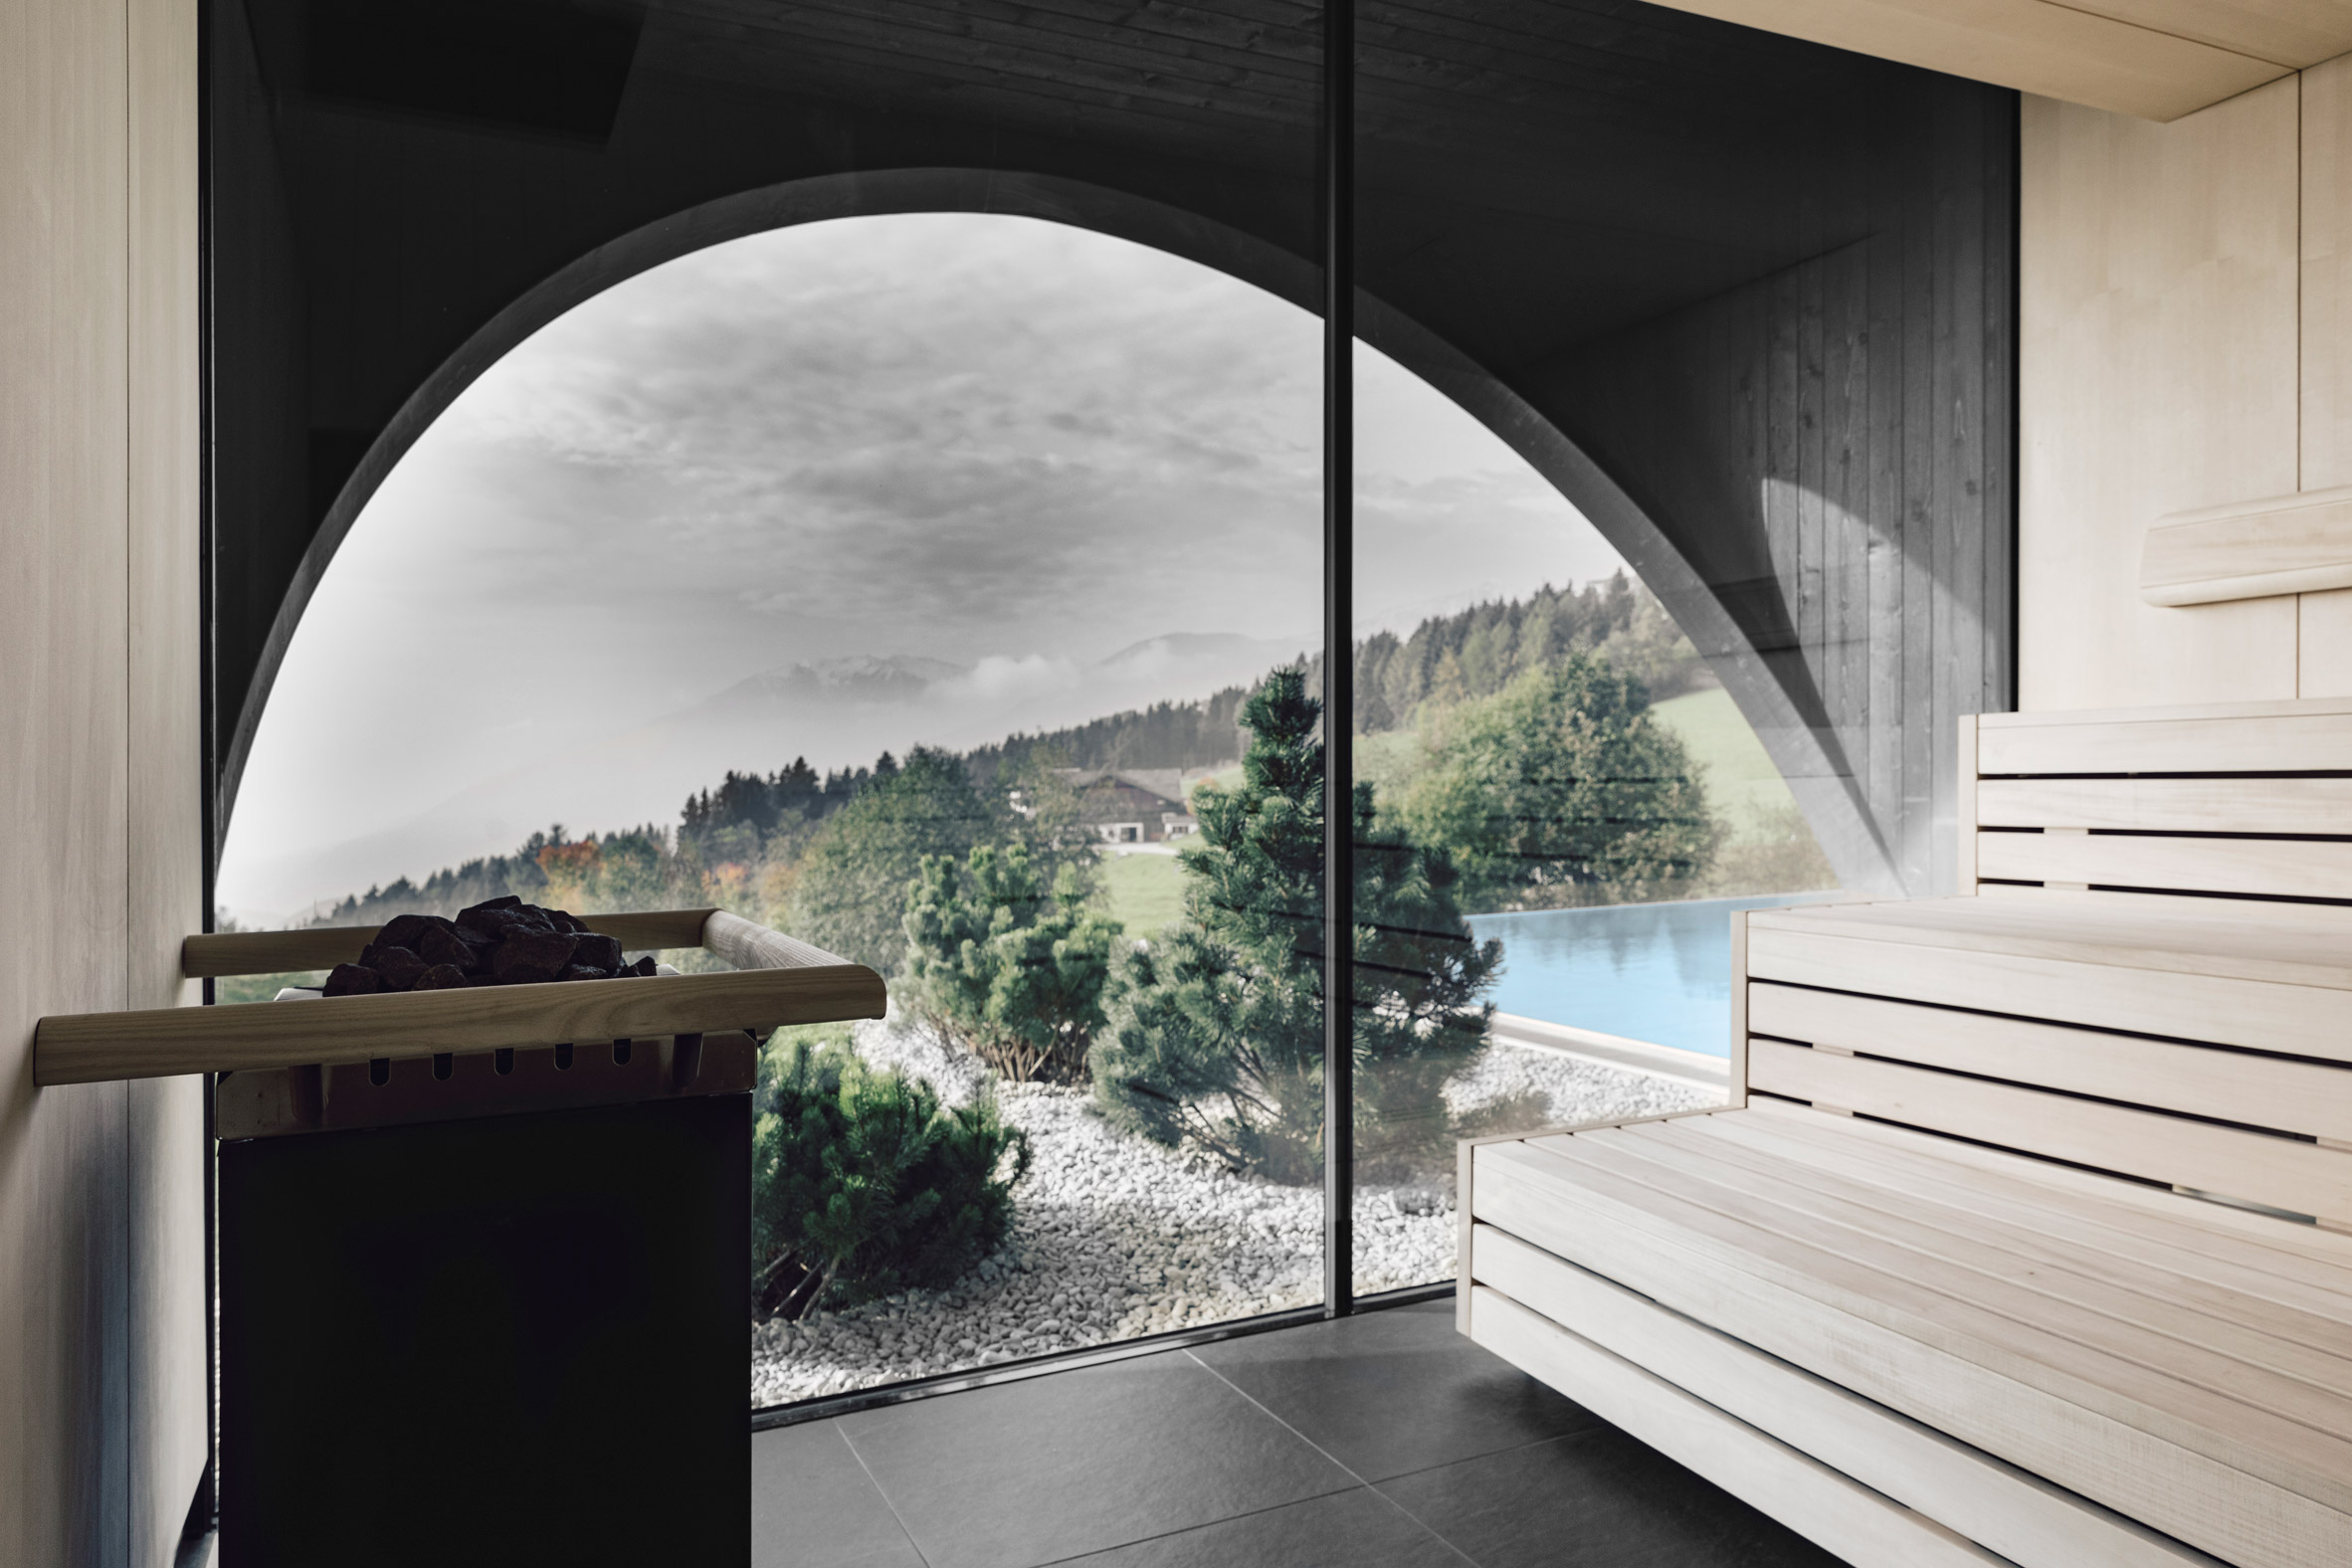 A spa inside Hotel Milla Montis by Peter Pichler Architecture